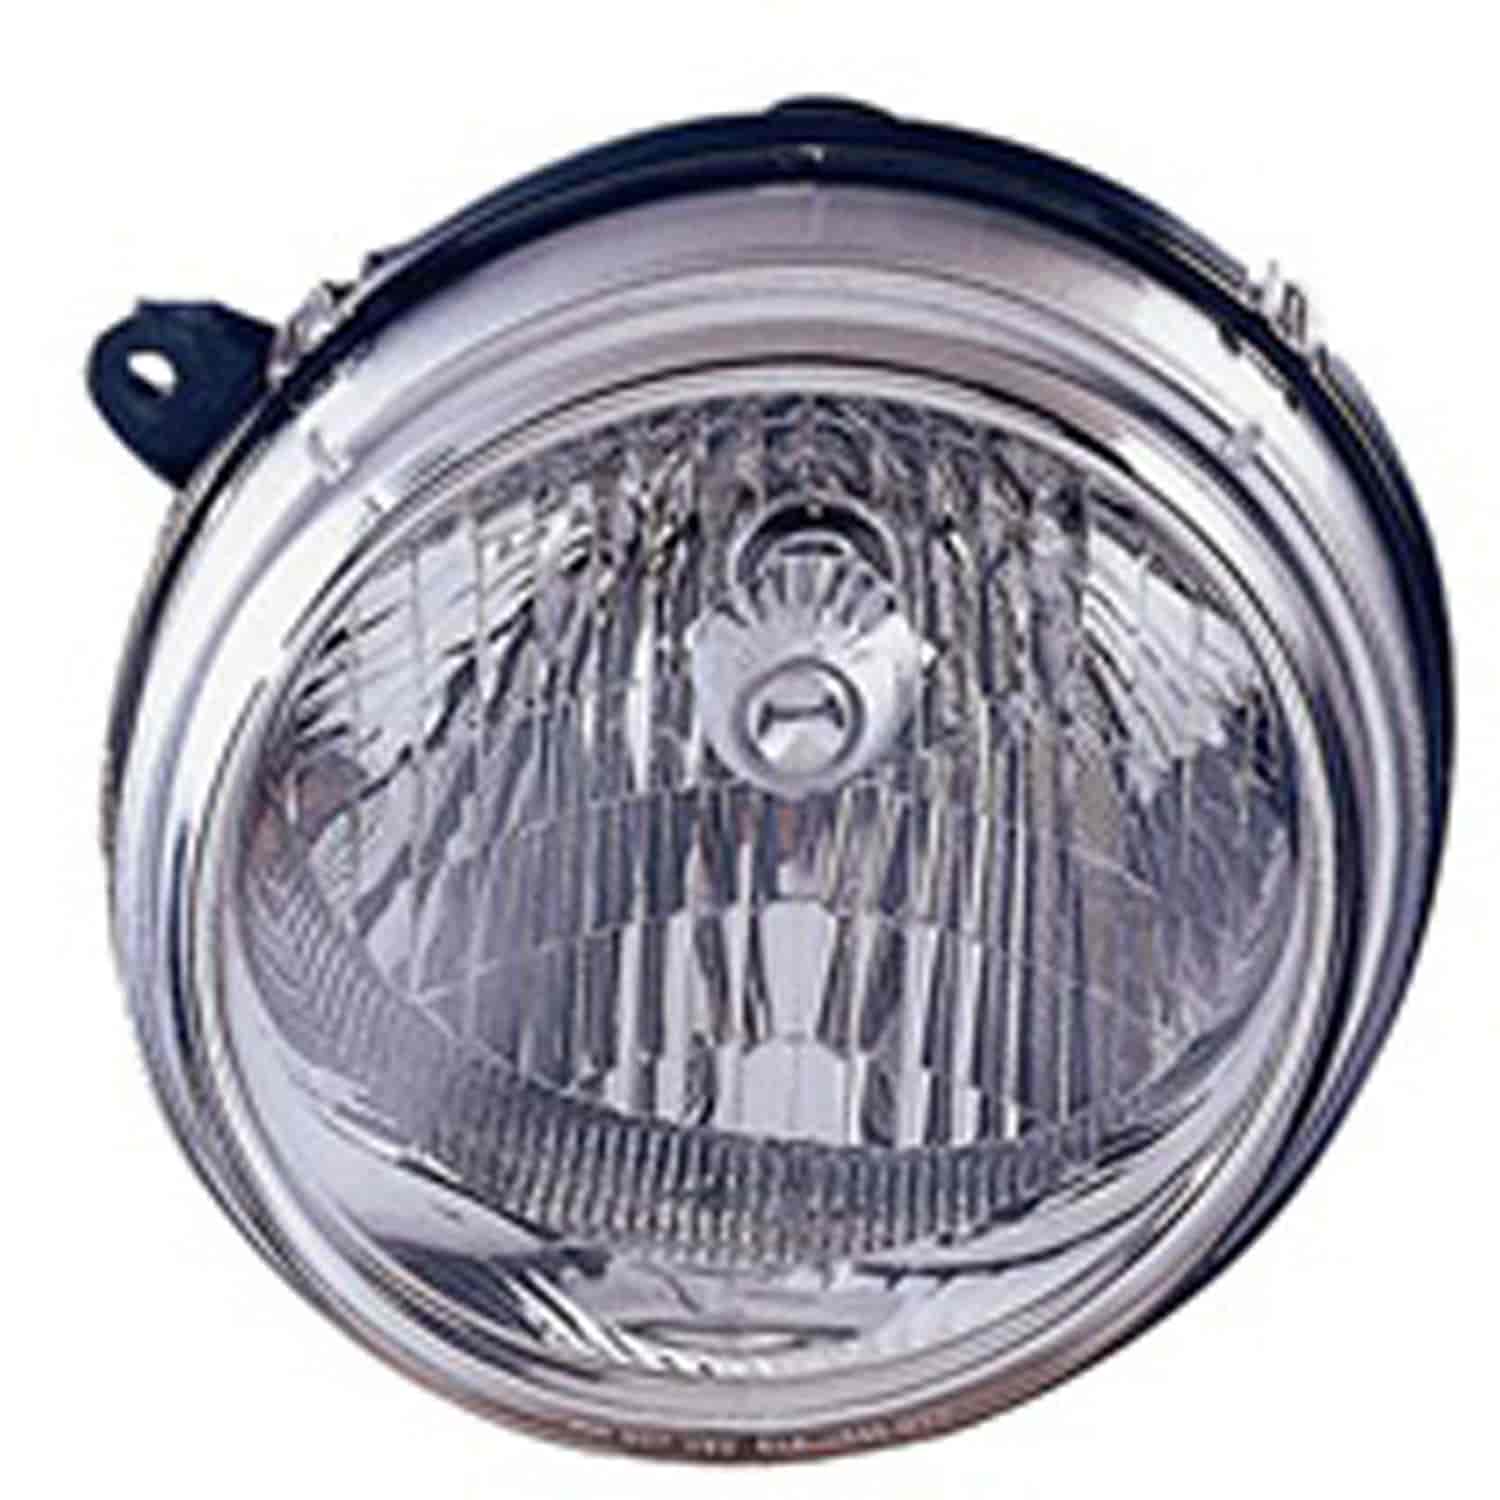 Replacement headlight assembly from Omix-ADA, Fits left side on 02-04 Jeep Liberty KJ built after November 06 2002.